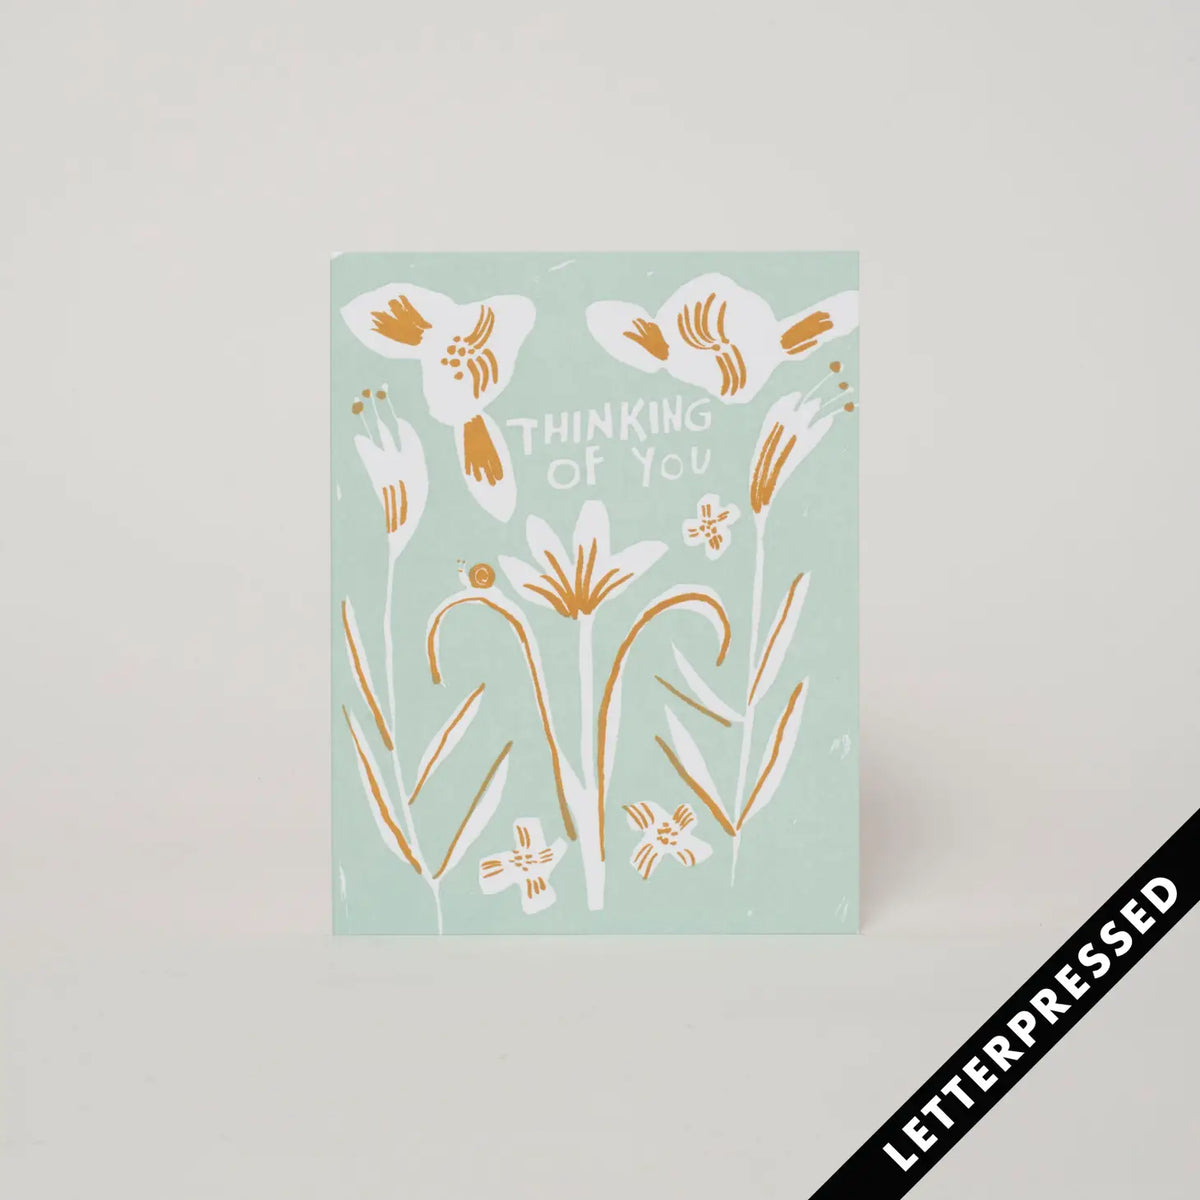 Thinking of You Lilies Card